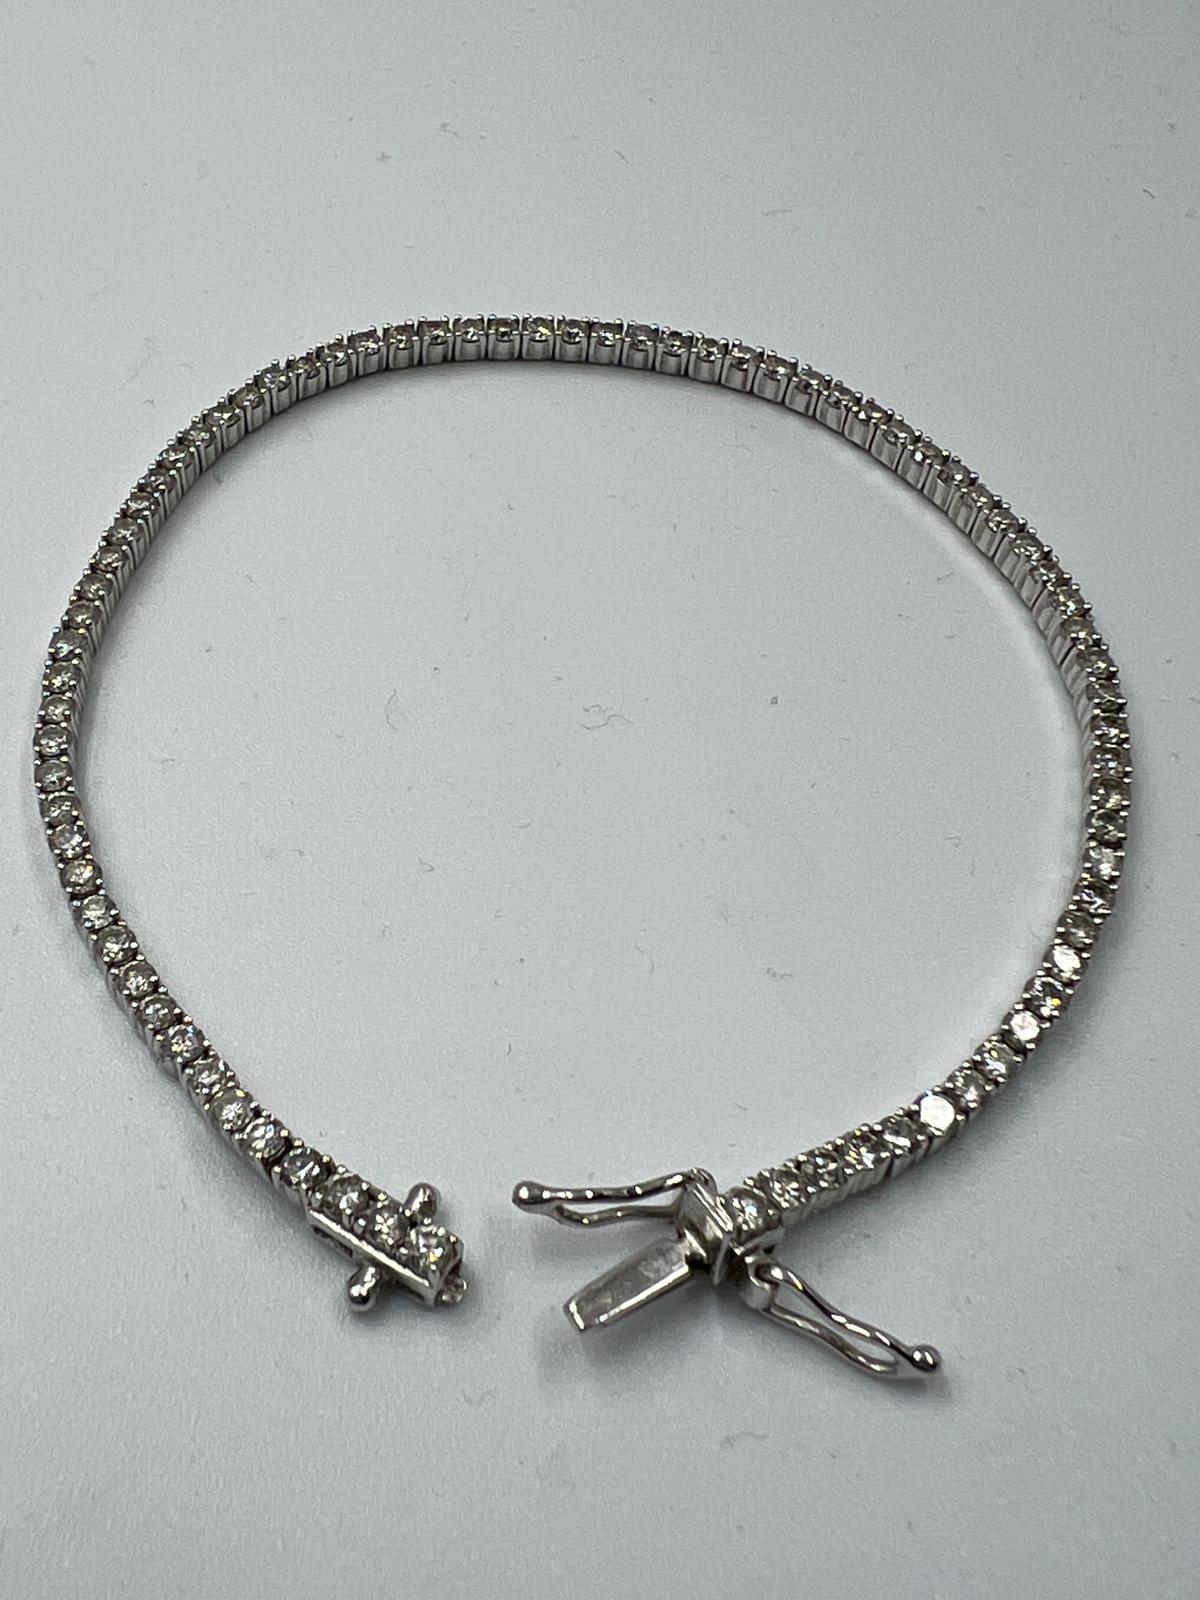 An 18ct white gold Tennis or line bracelet set with approximately 3ct of diamonds. - Image 6 of 25